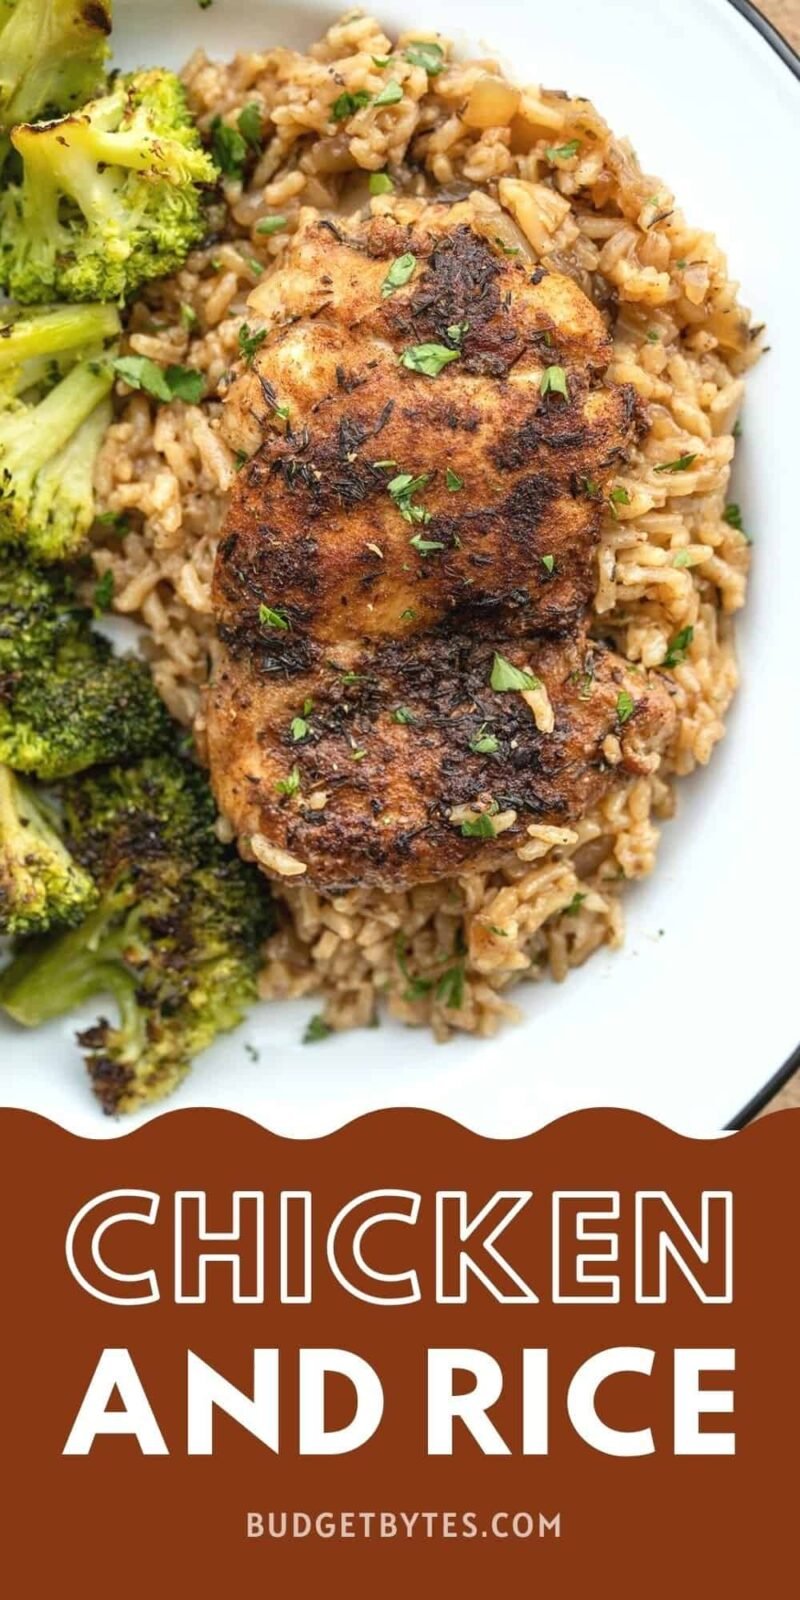 Chicken and rice on a plate with roasted broccoli.